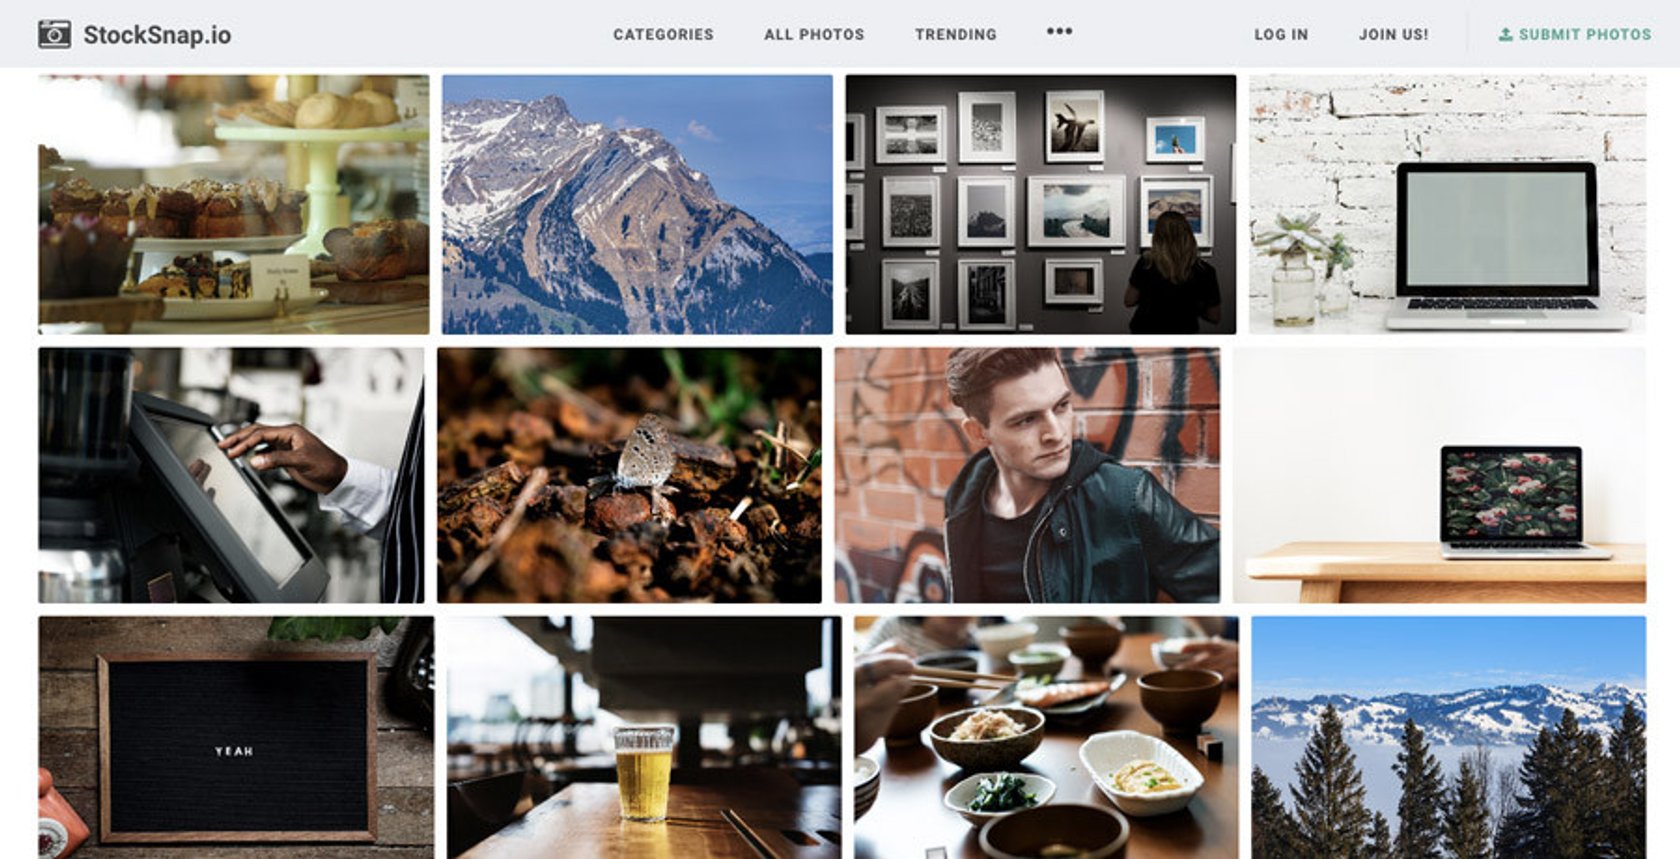 Stock Photo Sites Uncovered: Free and Paid Options for High-Quality Photos | Skylum Blog